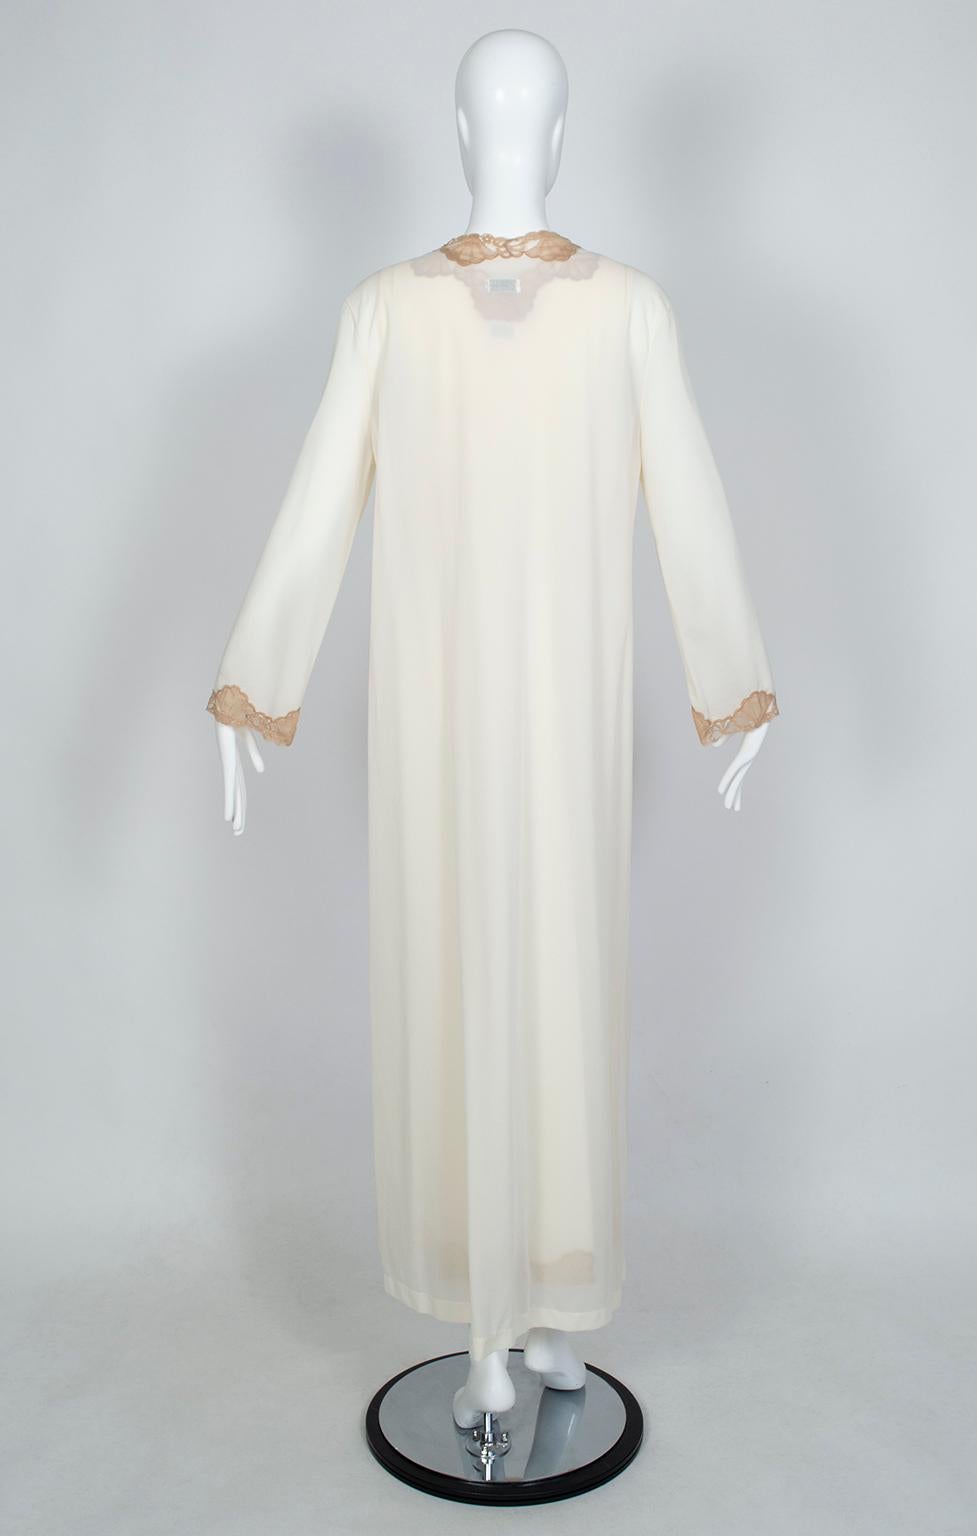 Women's Emilio Pucci Formfit Rogers Ivory Bridal Peignoir Gown and Robe Set – M, 1960s